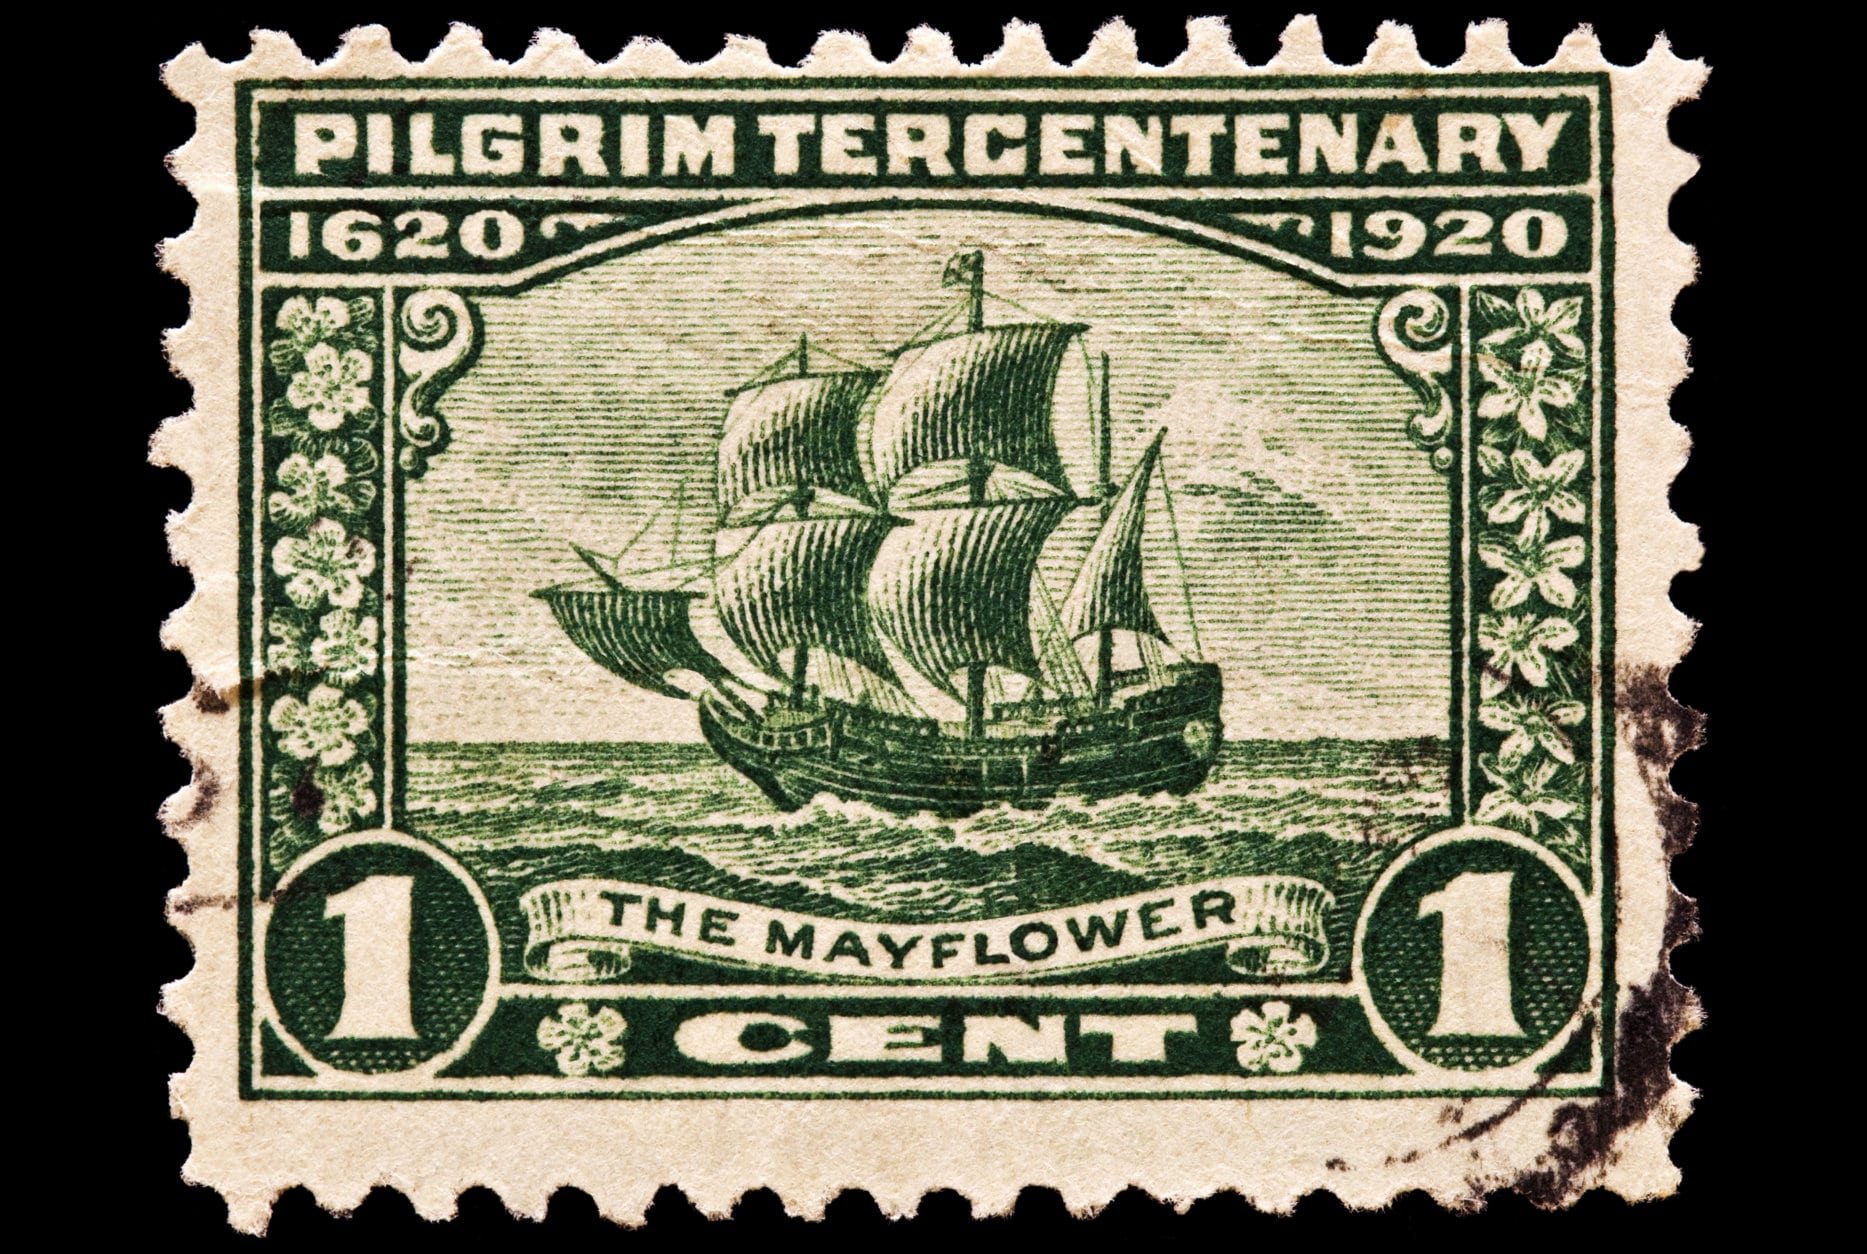 Pilgrim tercentenary issue was issued in 1923. The 1 cent denomination pictures the Mayflower crossing the Atlantic on its way to Plymouth, Mass.